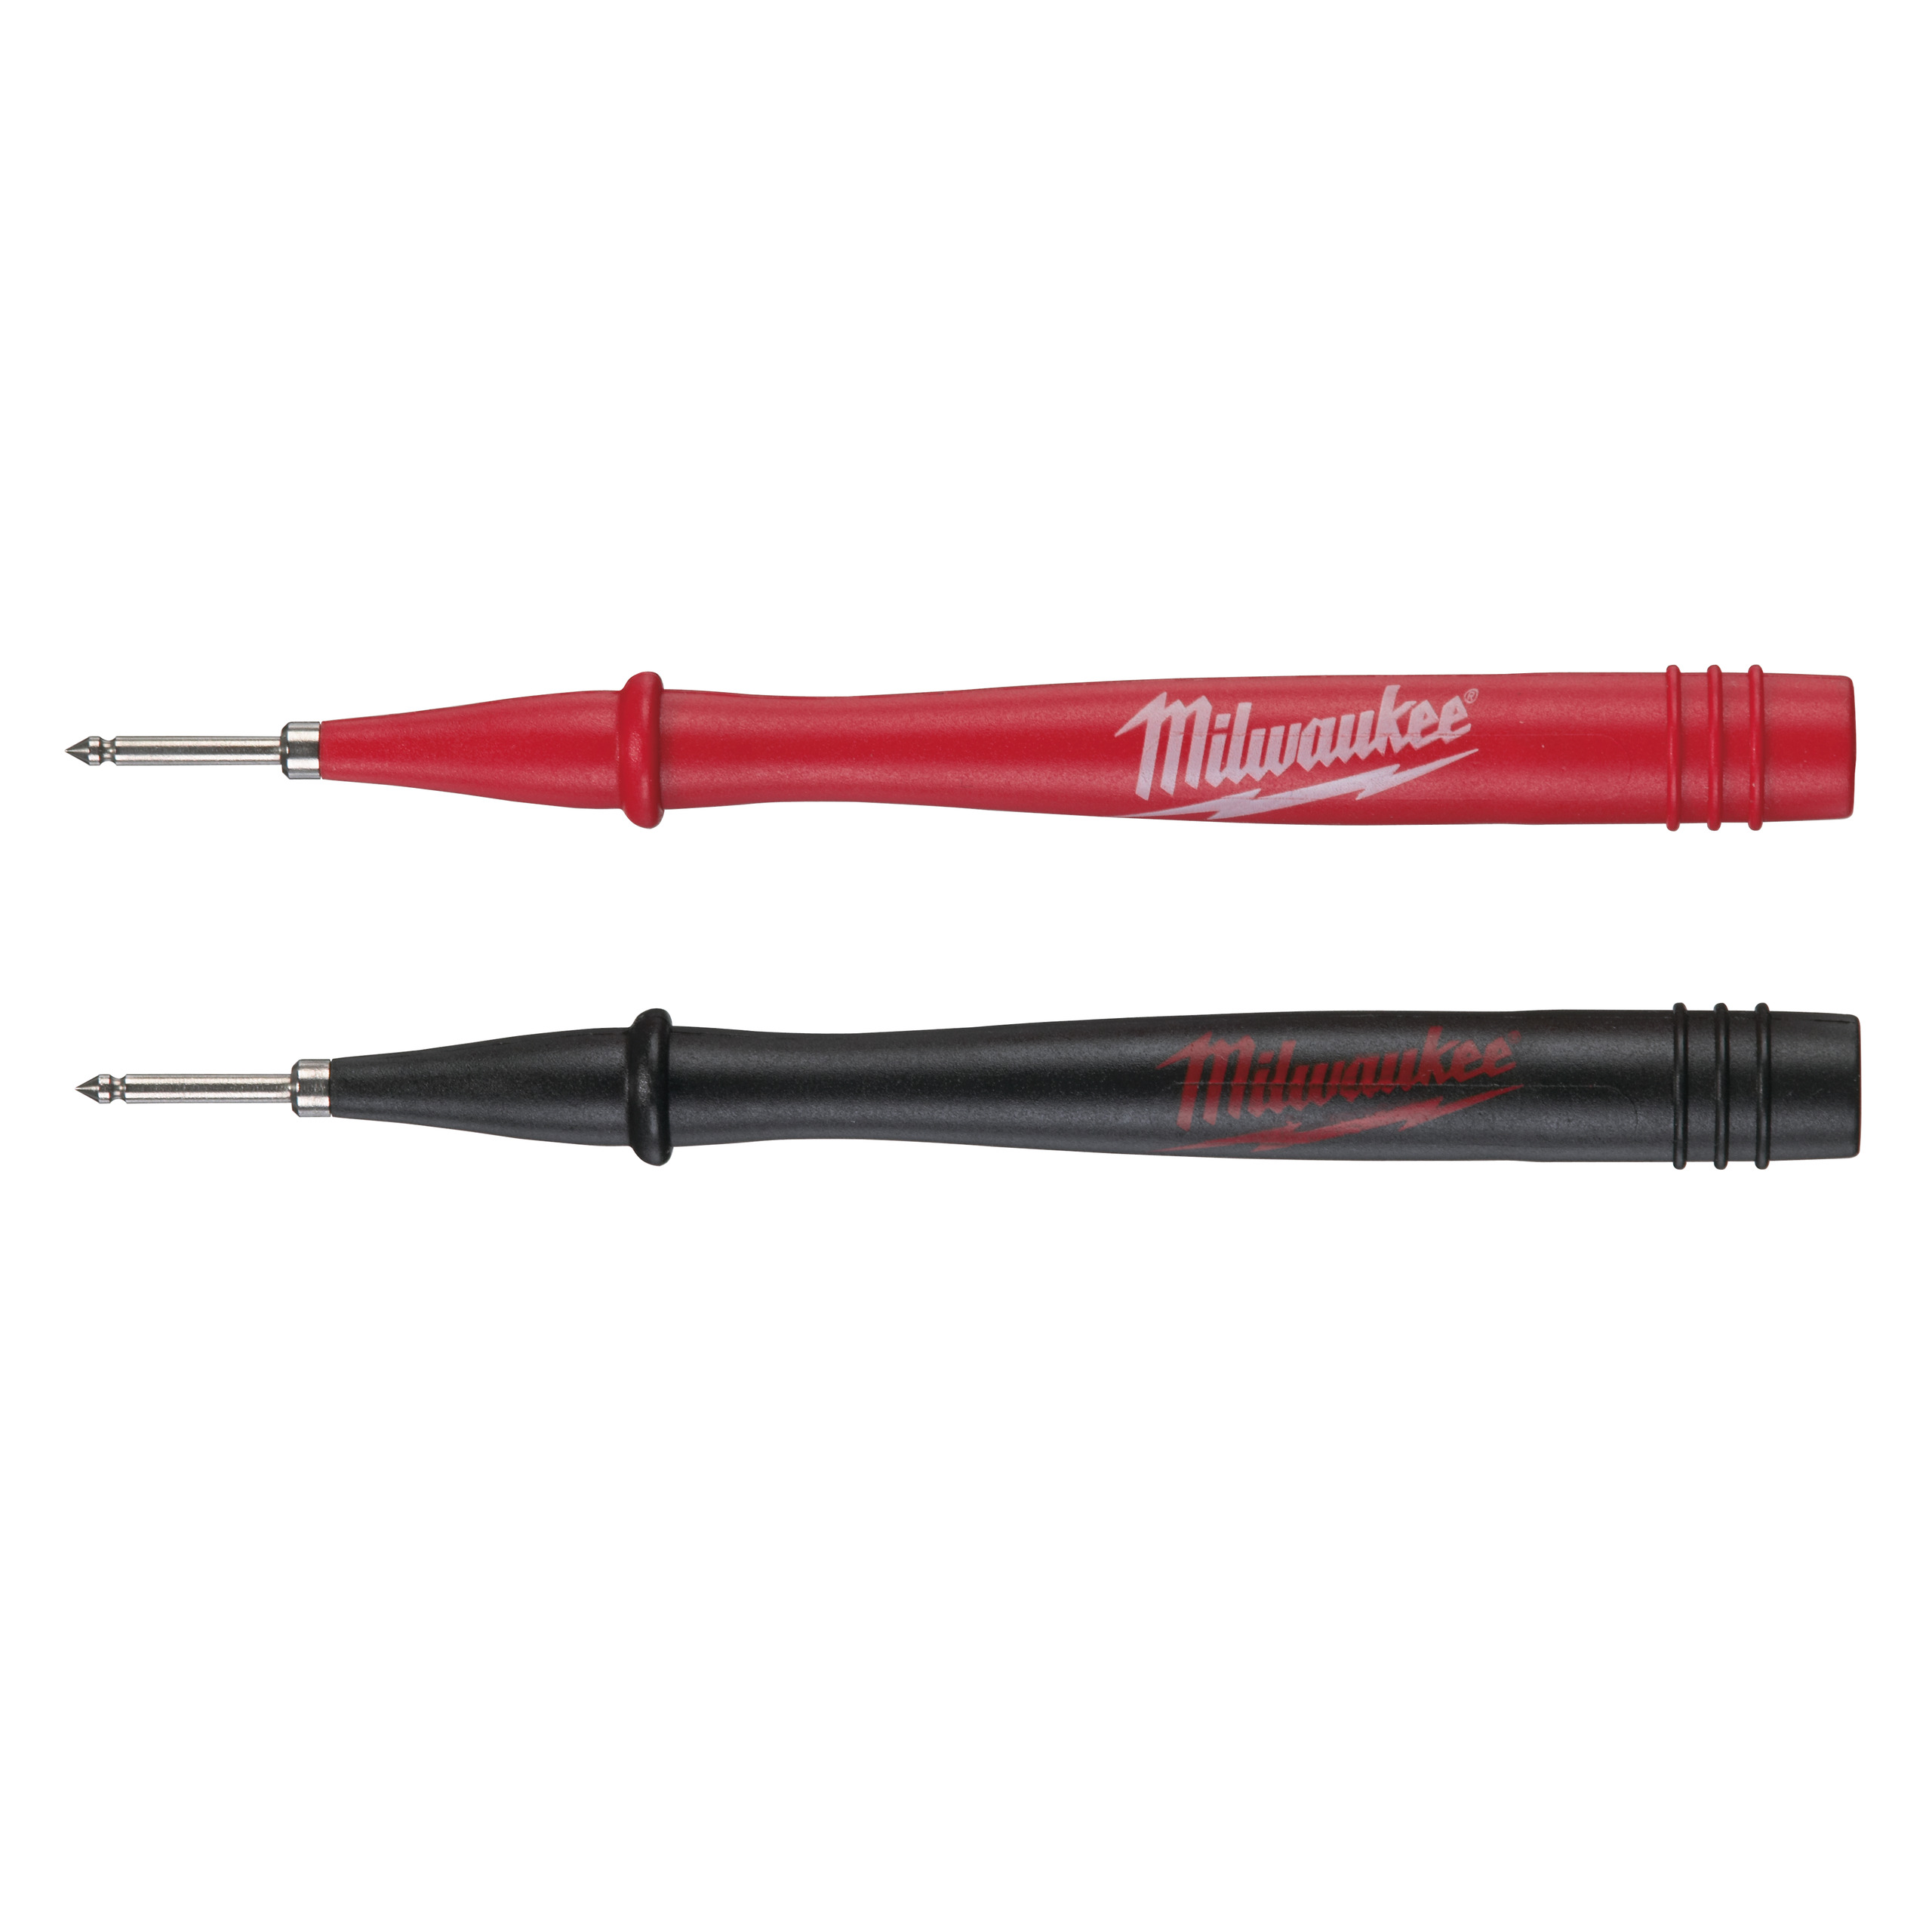 Milwaukee Electrical test probes 49771004